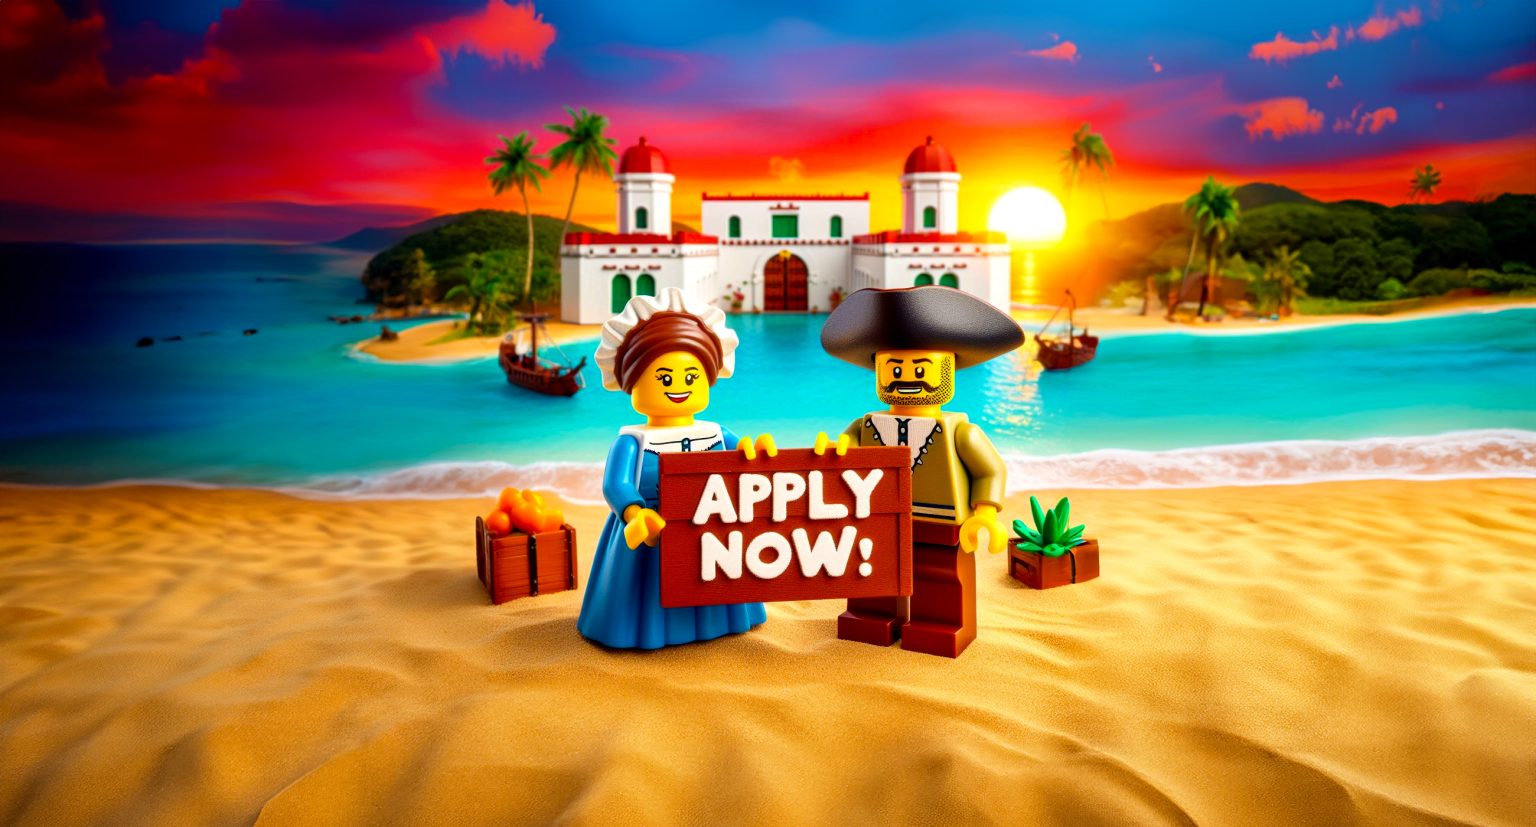 Two LEGO Armada peasants holding an Apply Now sign on a beach